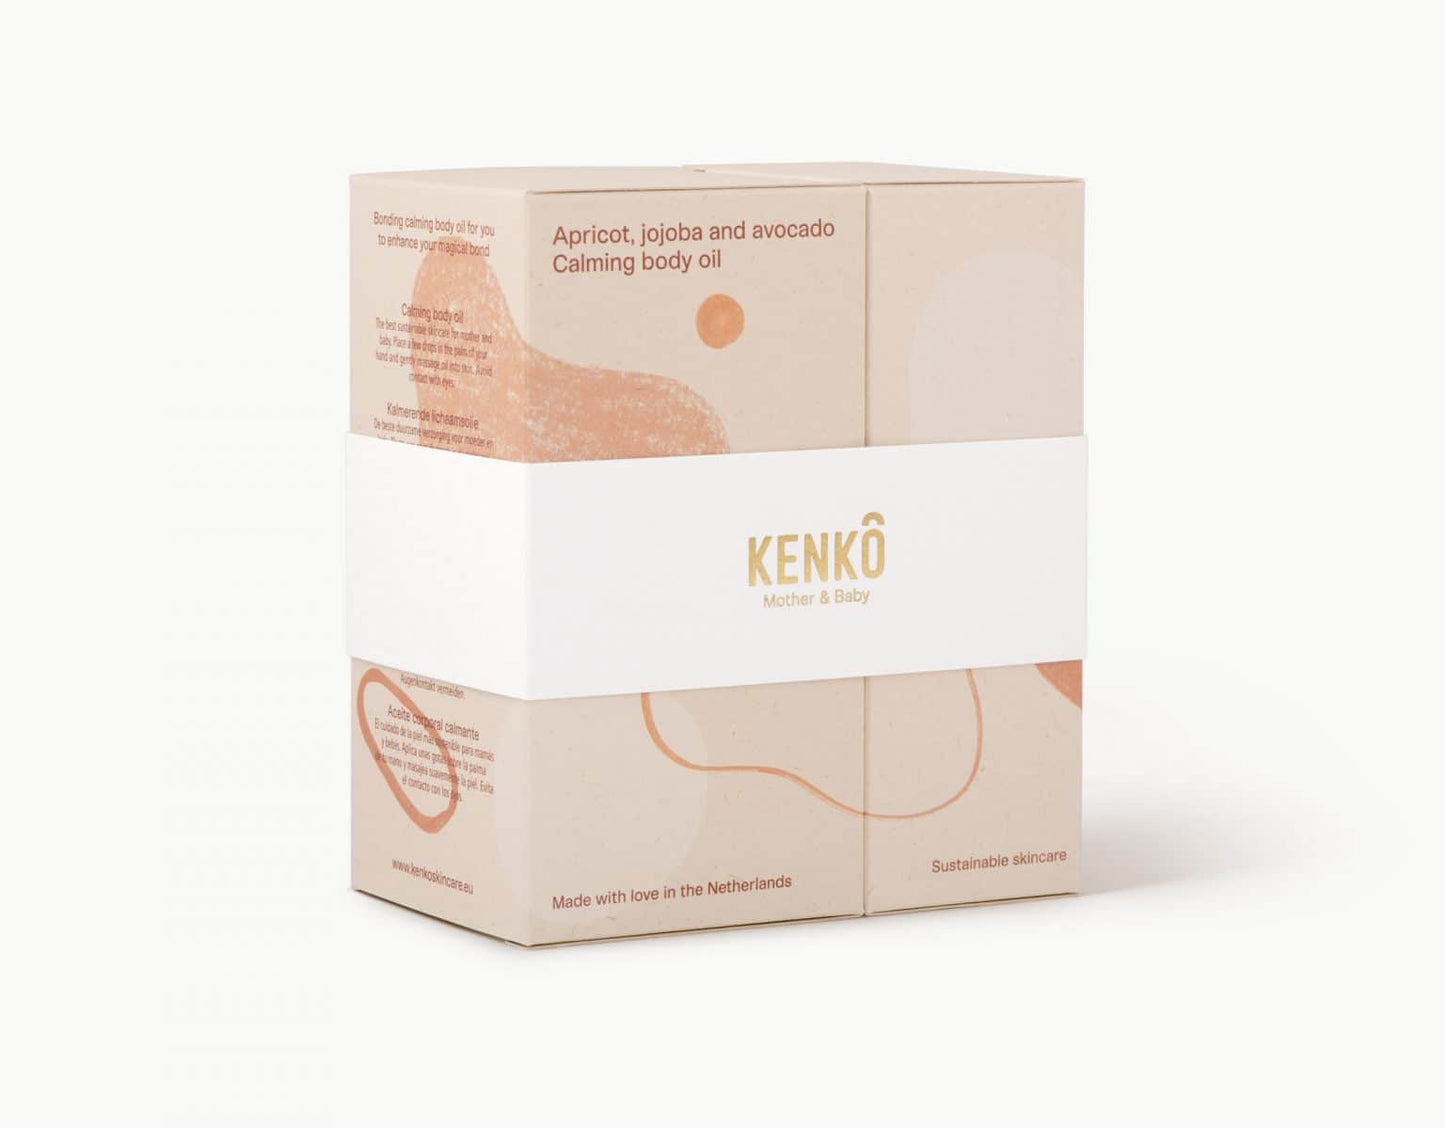 kenko-skincare-pack-calming-body-oil-mother-and-baby-1536x1199